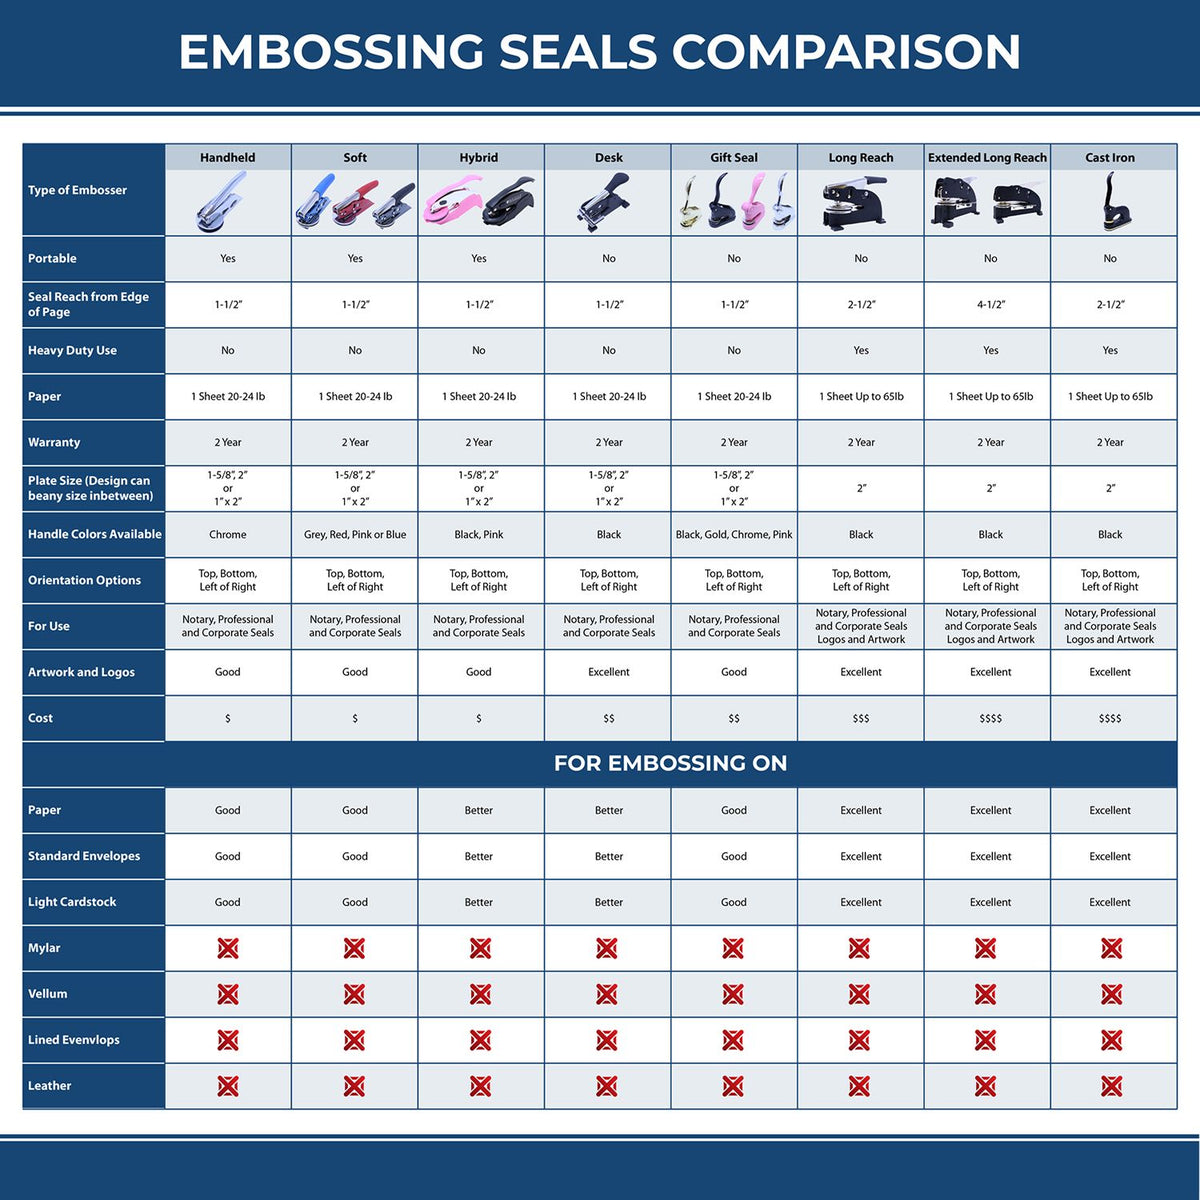 A comparison chart for the different types of mount models available for the Heavy Duty Cast Iron Indiana Land Surveyor Seal Embosser.